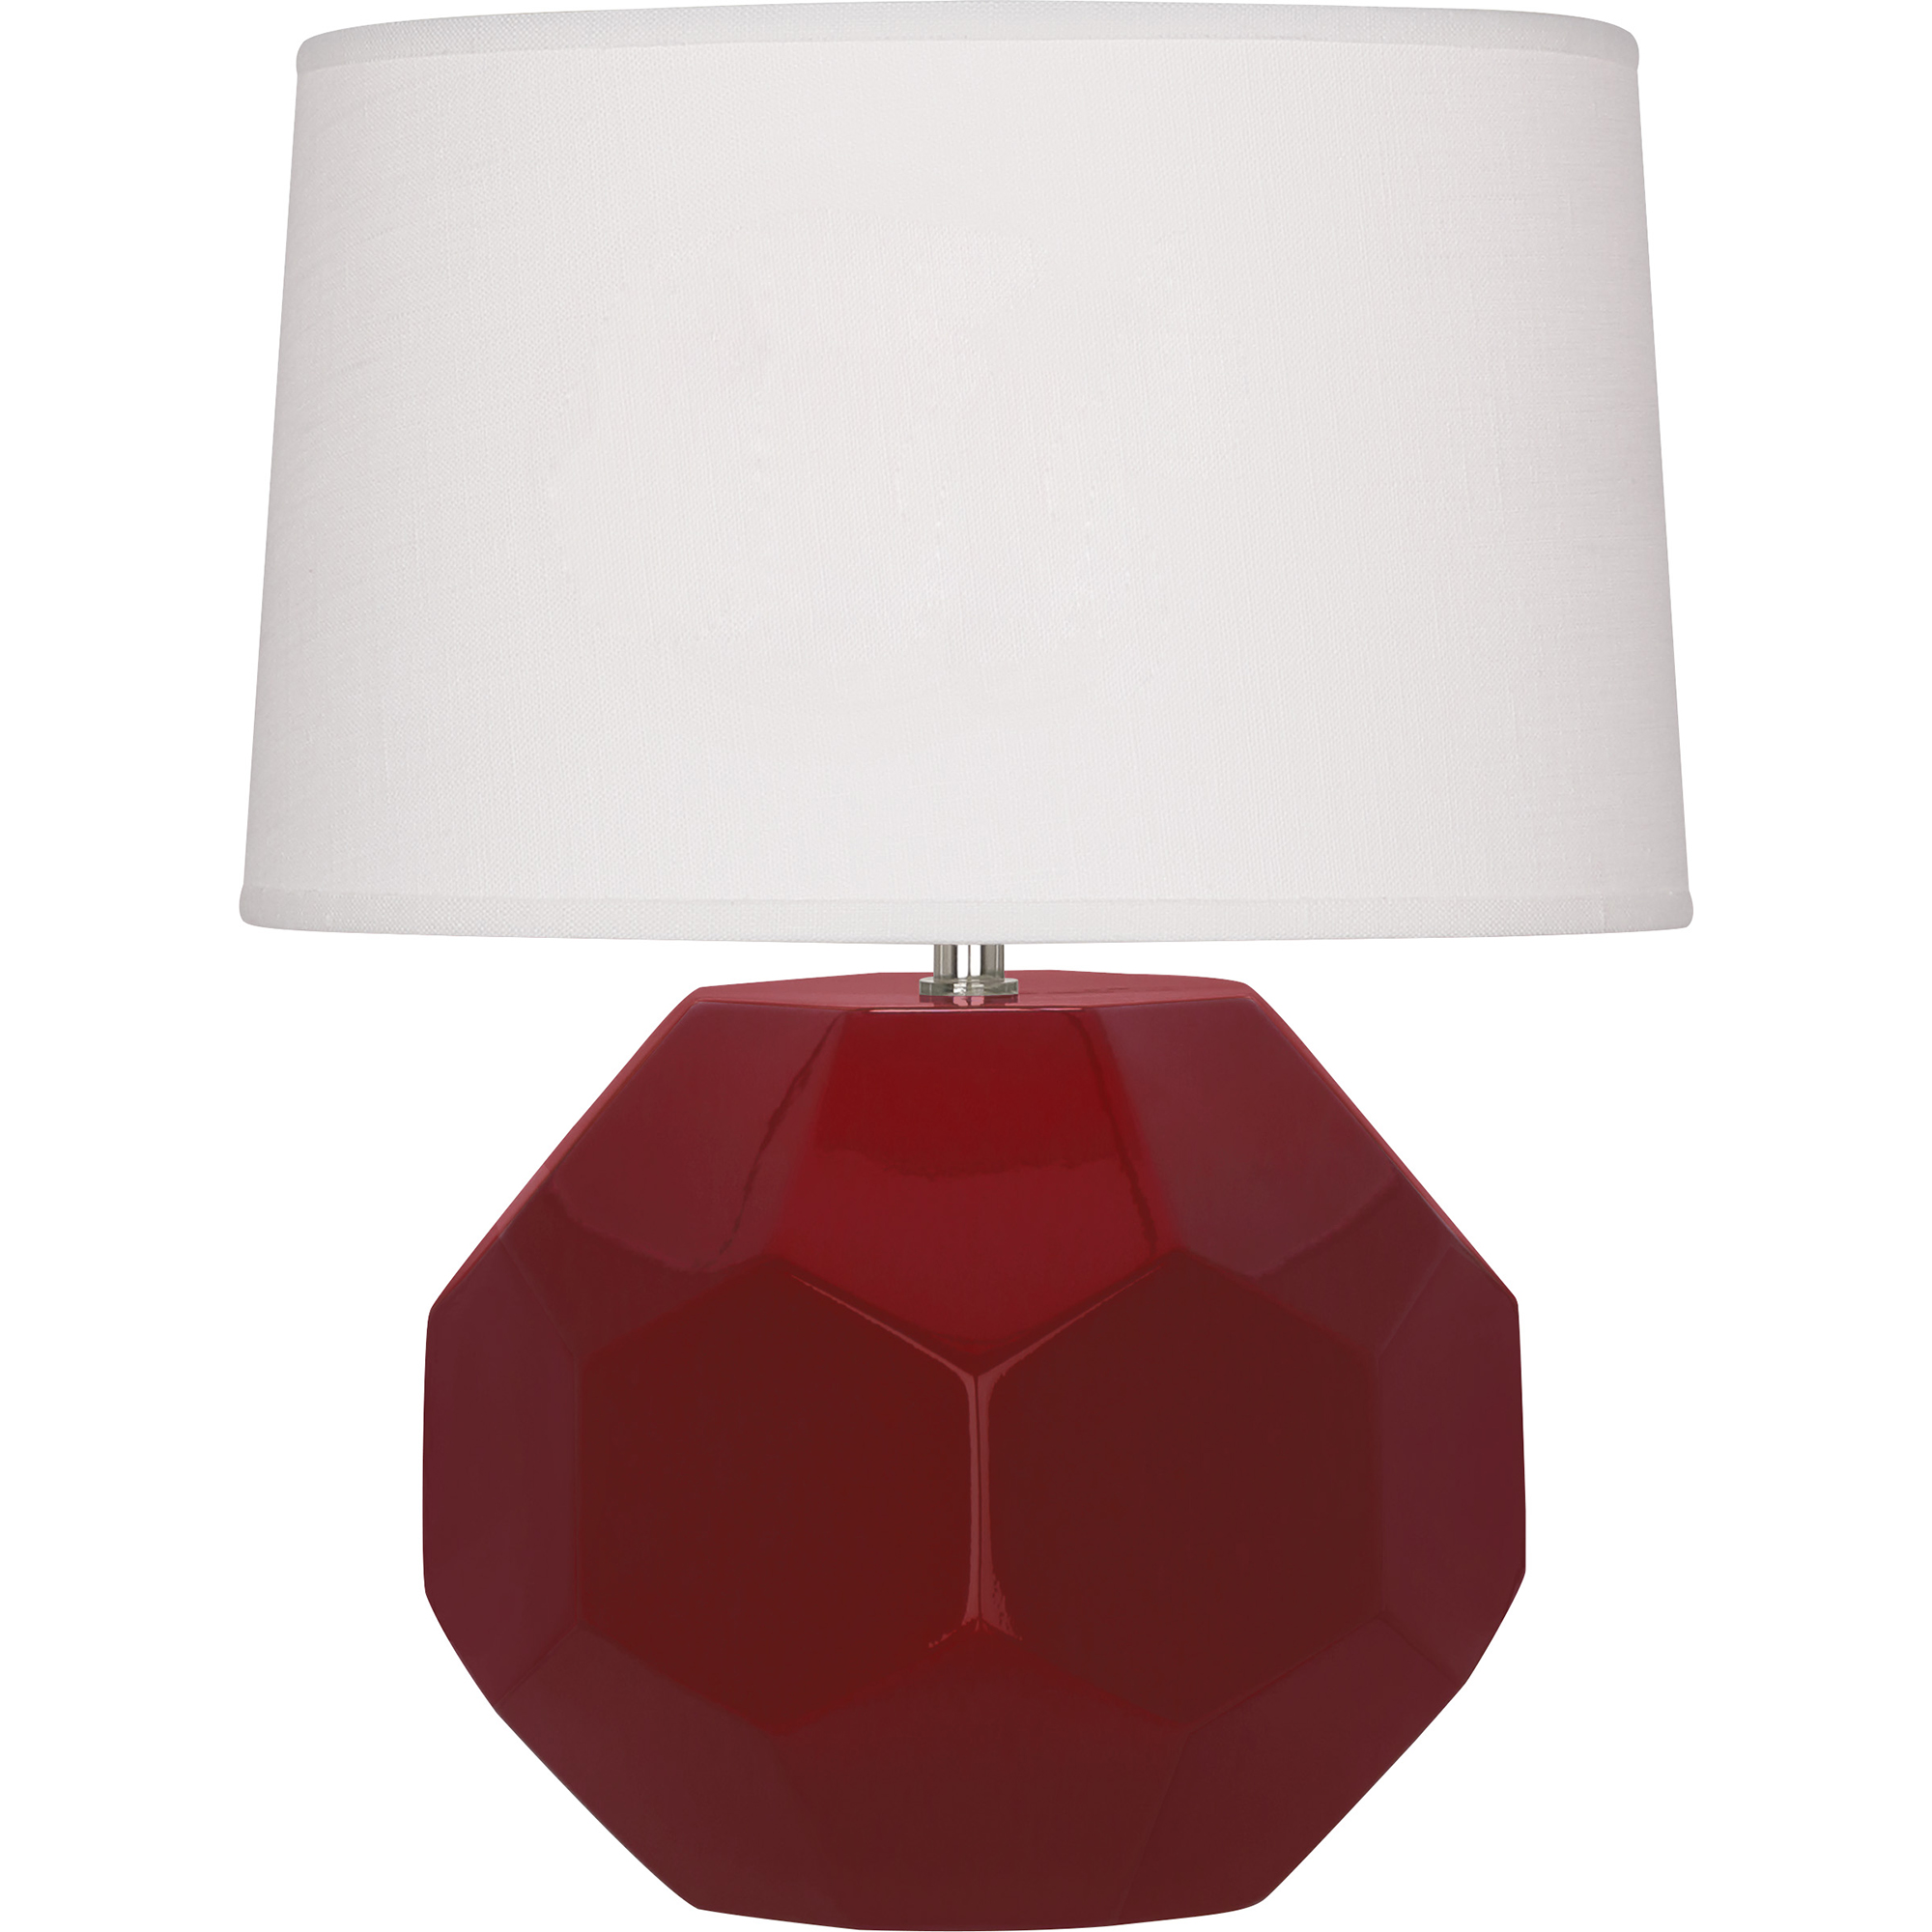 Franklin Accent Lamp Style #SA02